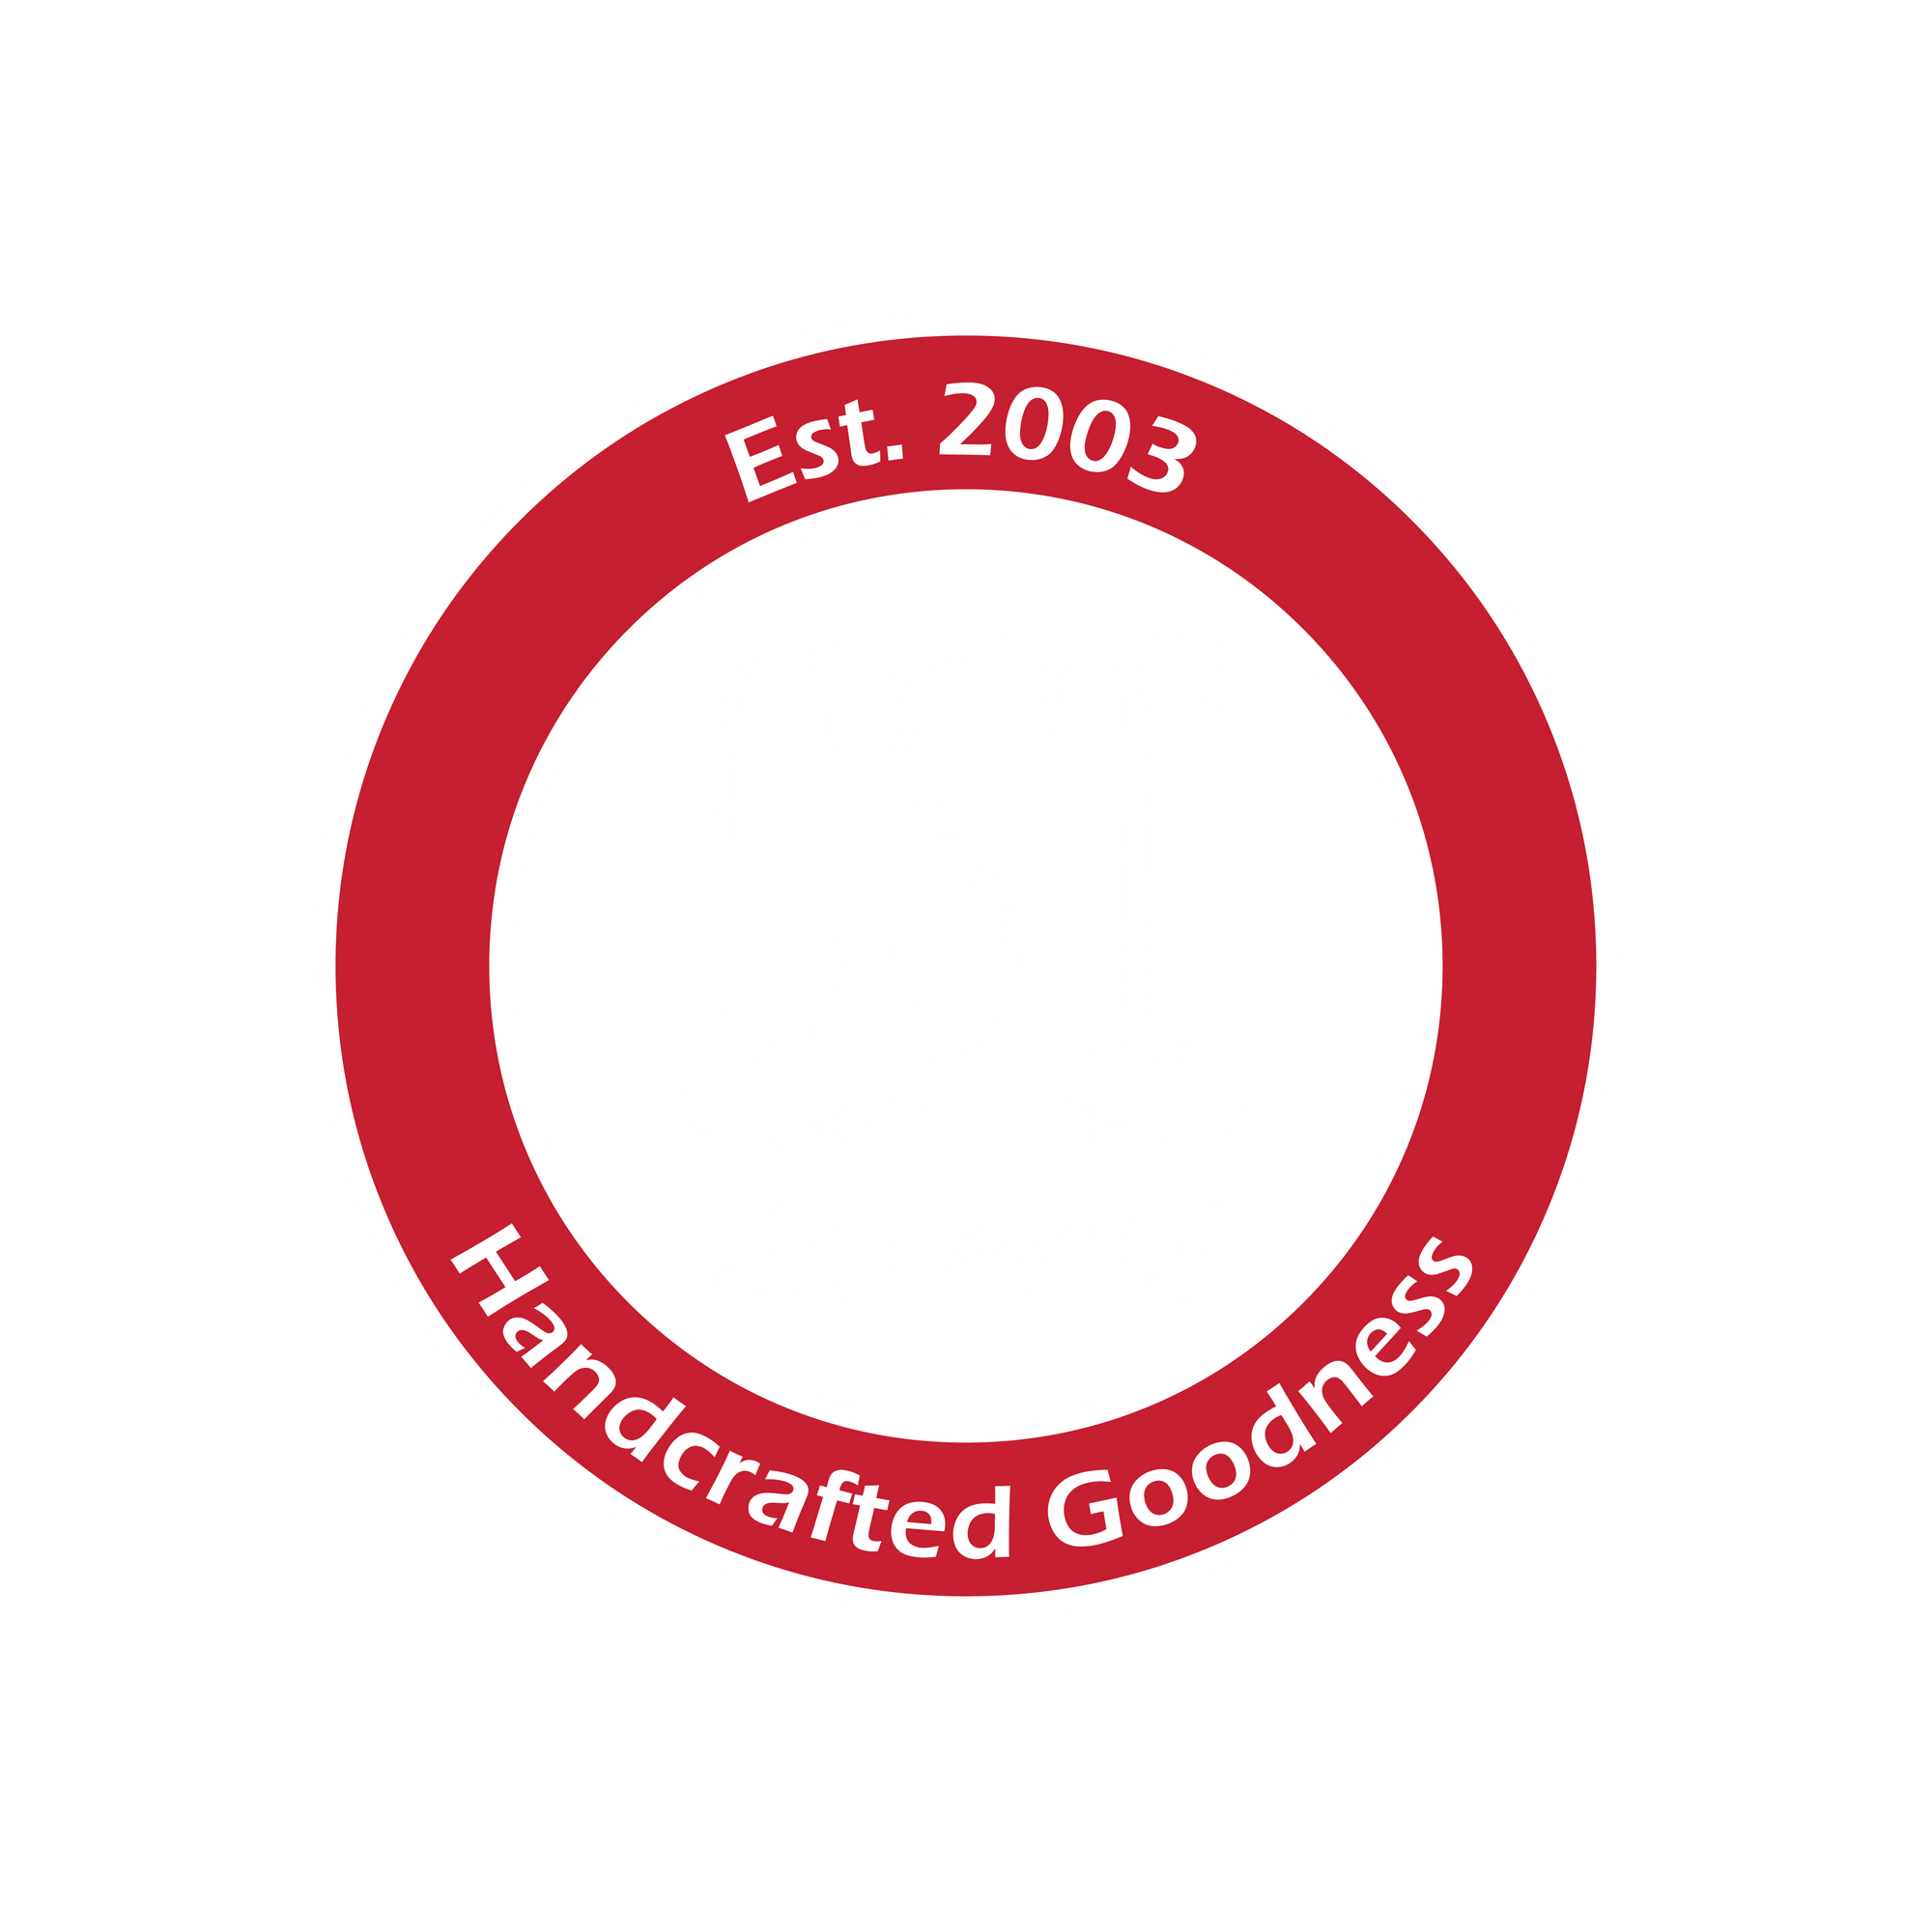 CSTsweets